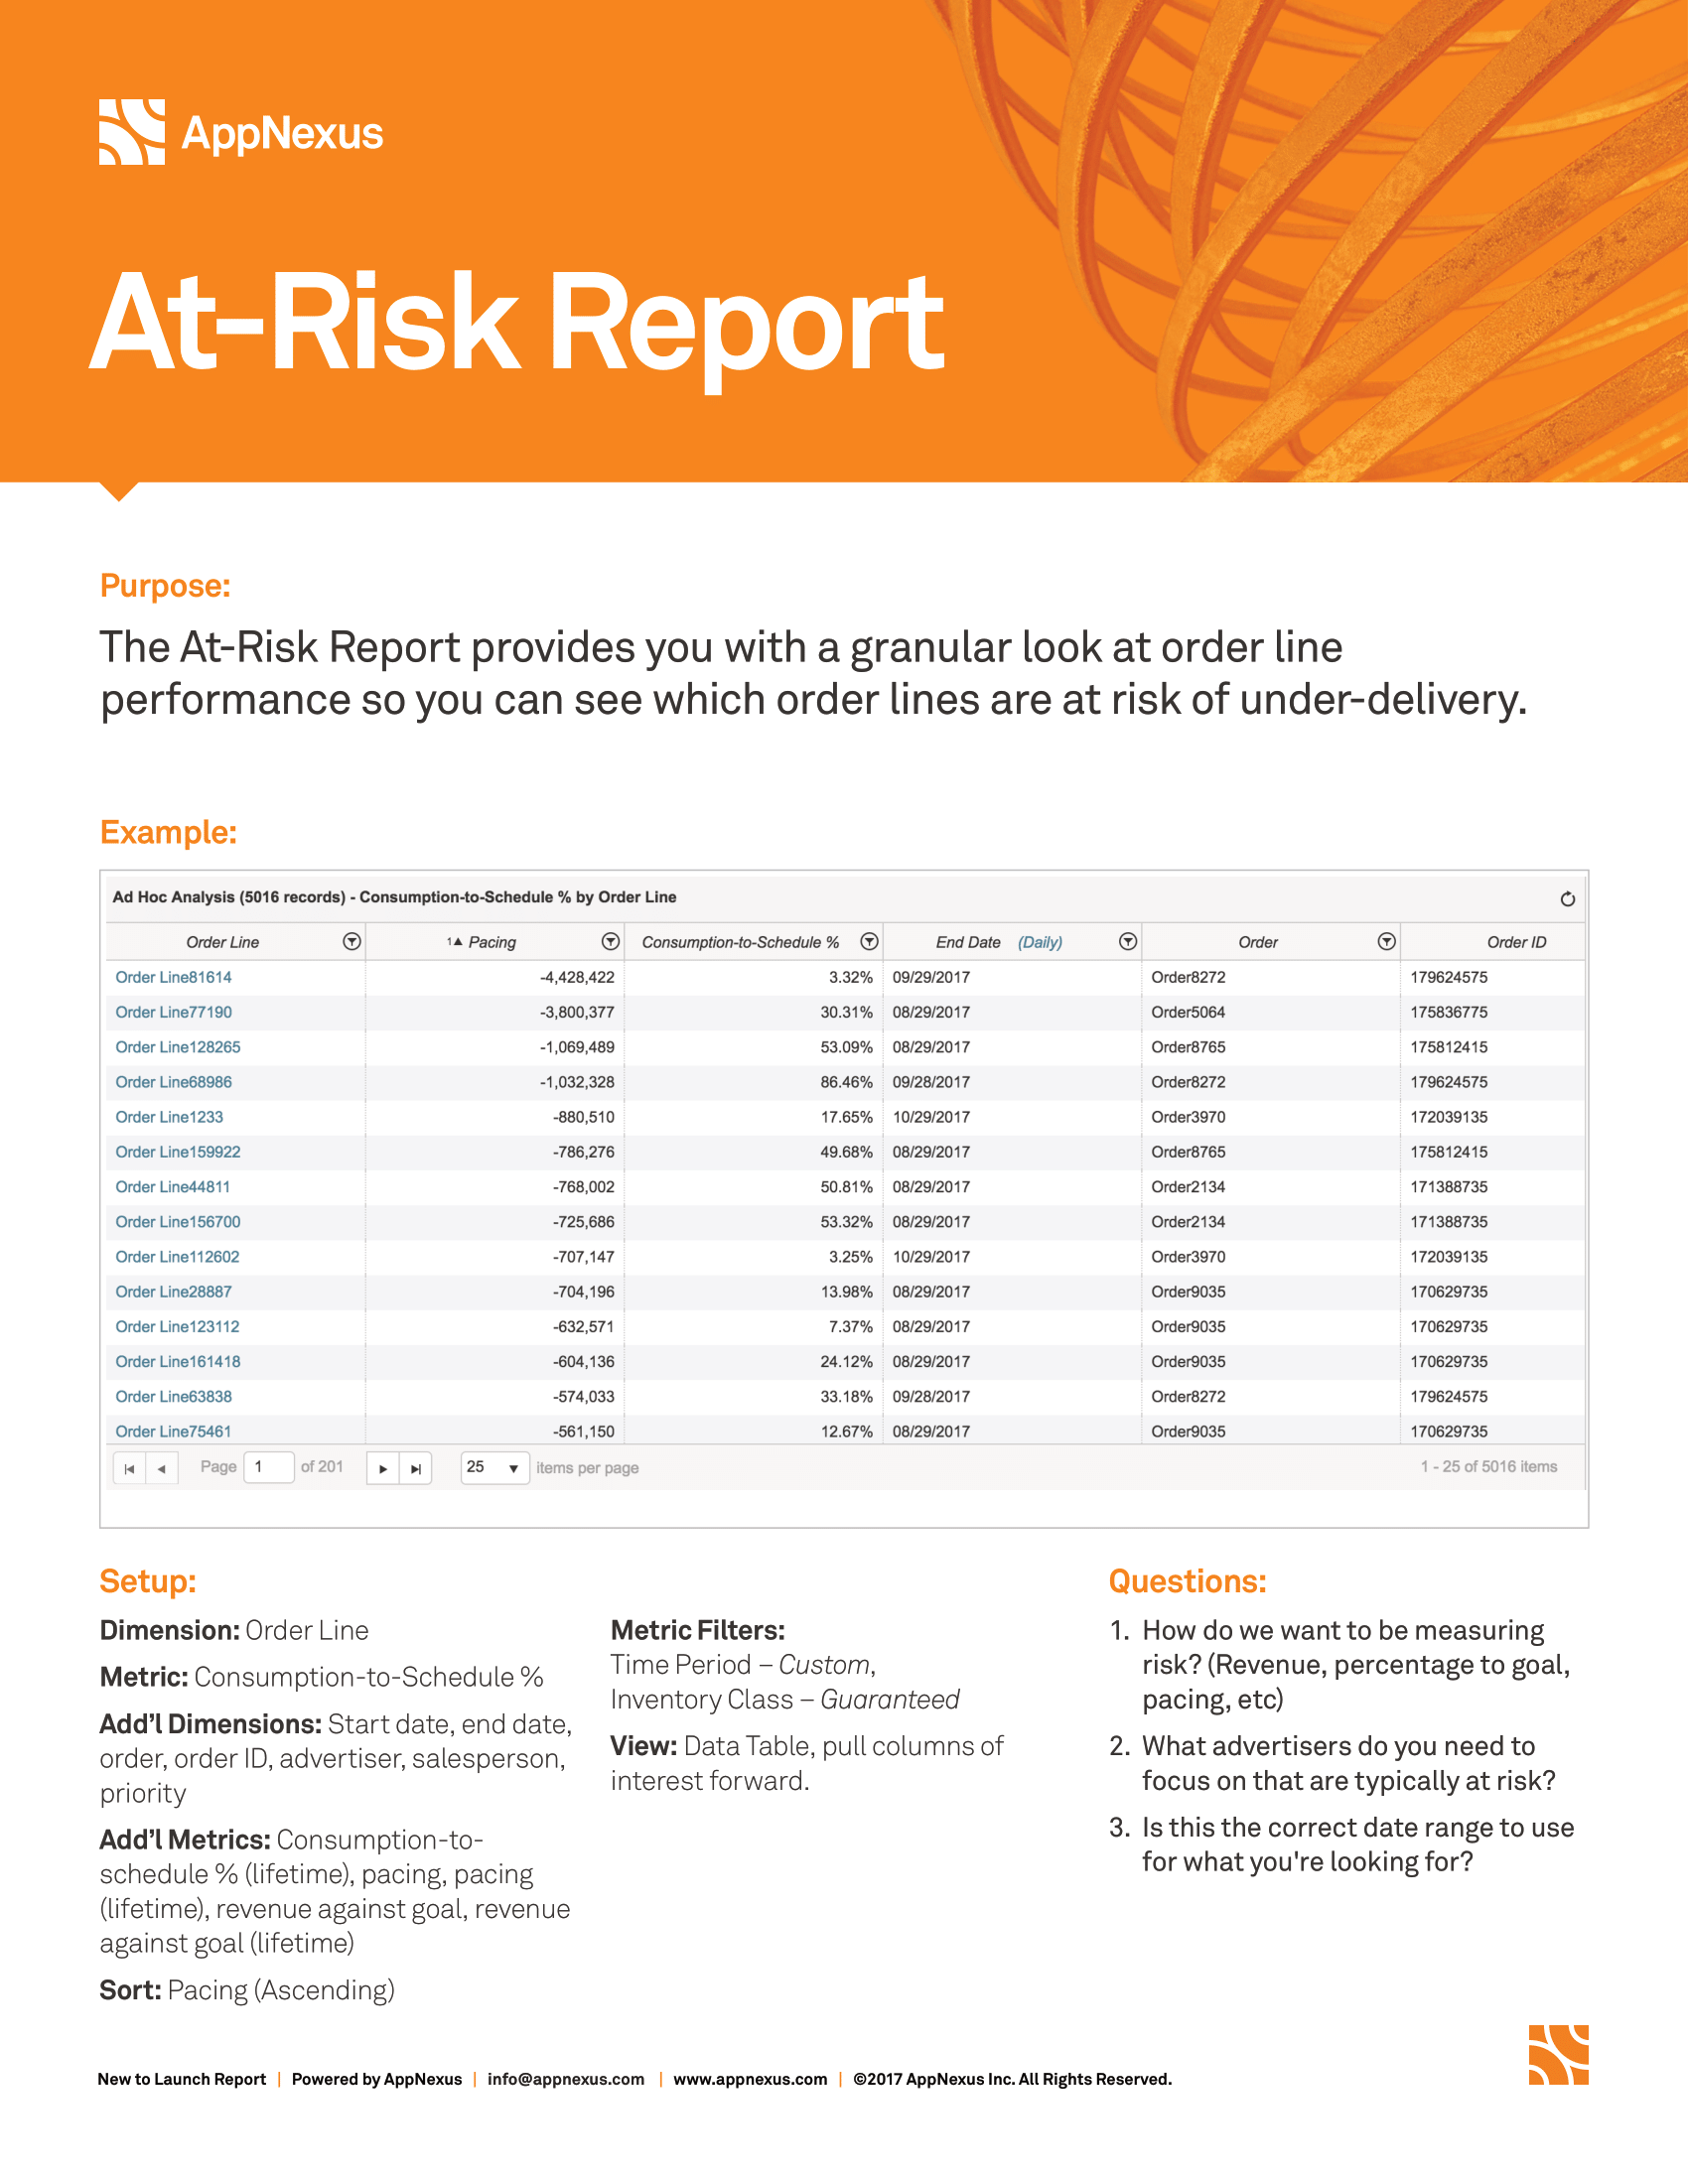 Screenshot that provides details about the At-Risk report.